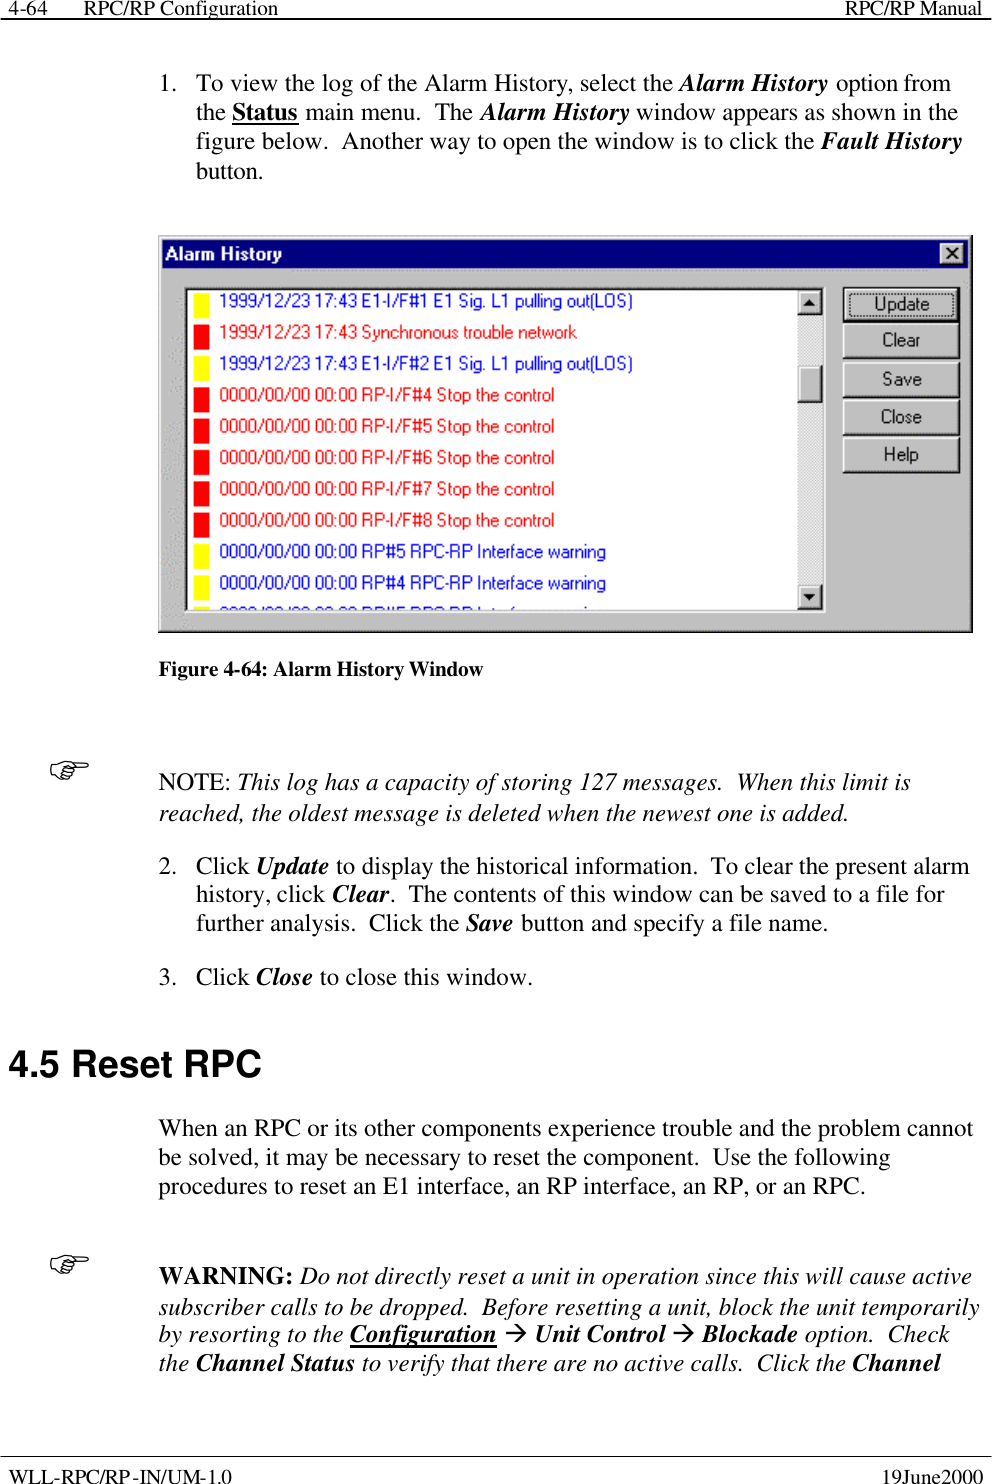  RPC/RP Configuration    RPC/RP Manual   WLL-RPC/RP-IN/UM-1.0    19June2000 4-641.  To view the log of the Alarm History, select the Alarm History option from the Status main menu.  The Alarm History window appears as shown in the figure below.  Another way to open the window is to click the Fault History button.  Figure 4-64: Alarm History Window F NOTE: This log has a capacity of storing 127 messages.  When this limit is reached, the oldest message is deleted when the newest one is added. 2.  Click Update to display the historical information.  To clear the present alarm history, click Clear.  The contents of this window can be saved to a file for further analysis.  Click the Save button and specify a file name. 3.  Click Close to close this window. 4.5 Reset RPC When an RPC or its other components experience trouble and the problem cannot be solved, it may be necessary to reset the component.  Use the following procedures to reset an E1 interface, an RP interface, an RP, or an RPC.   F WARNING: Do not directly reset a unit in operation since this will cause active subscriber calls to be dropped.  Before resetting a unit, block the unit temporarily by resorting to the Configuration à Unit Control à Blockade option.  Check the Channel Status to verify that there are no active calls.  Click the Channel 